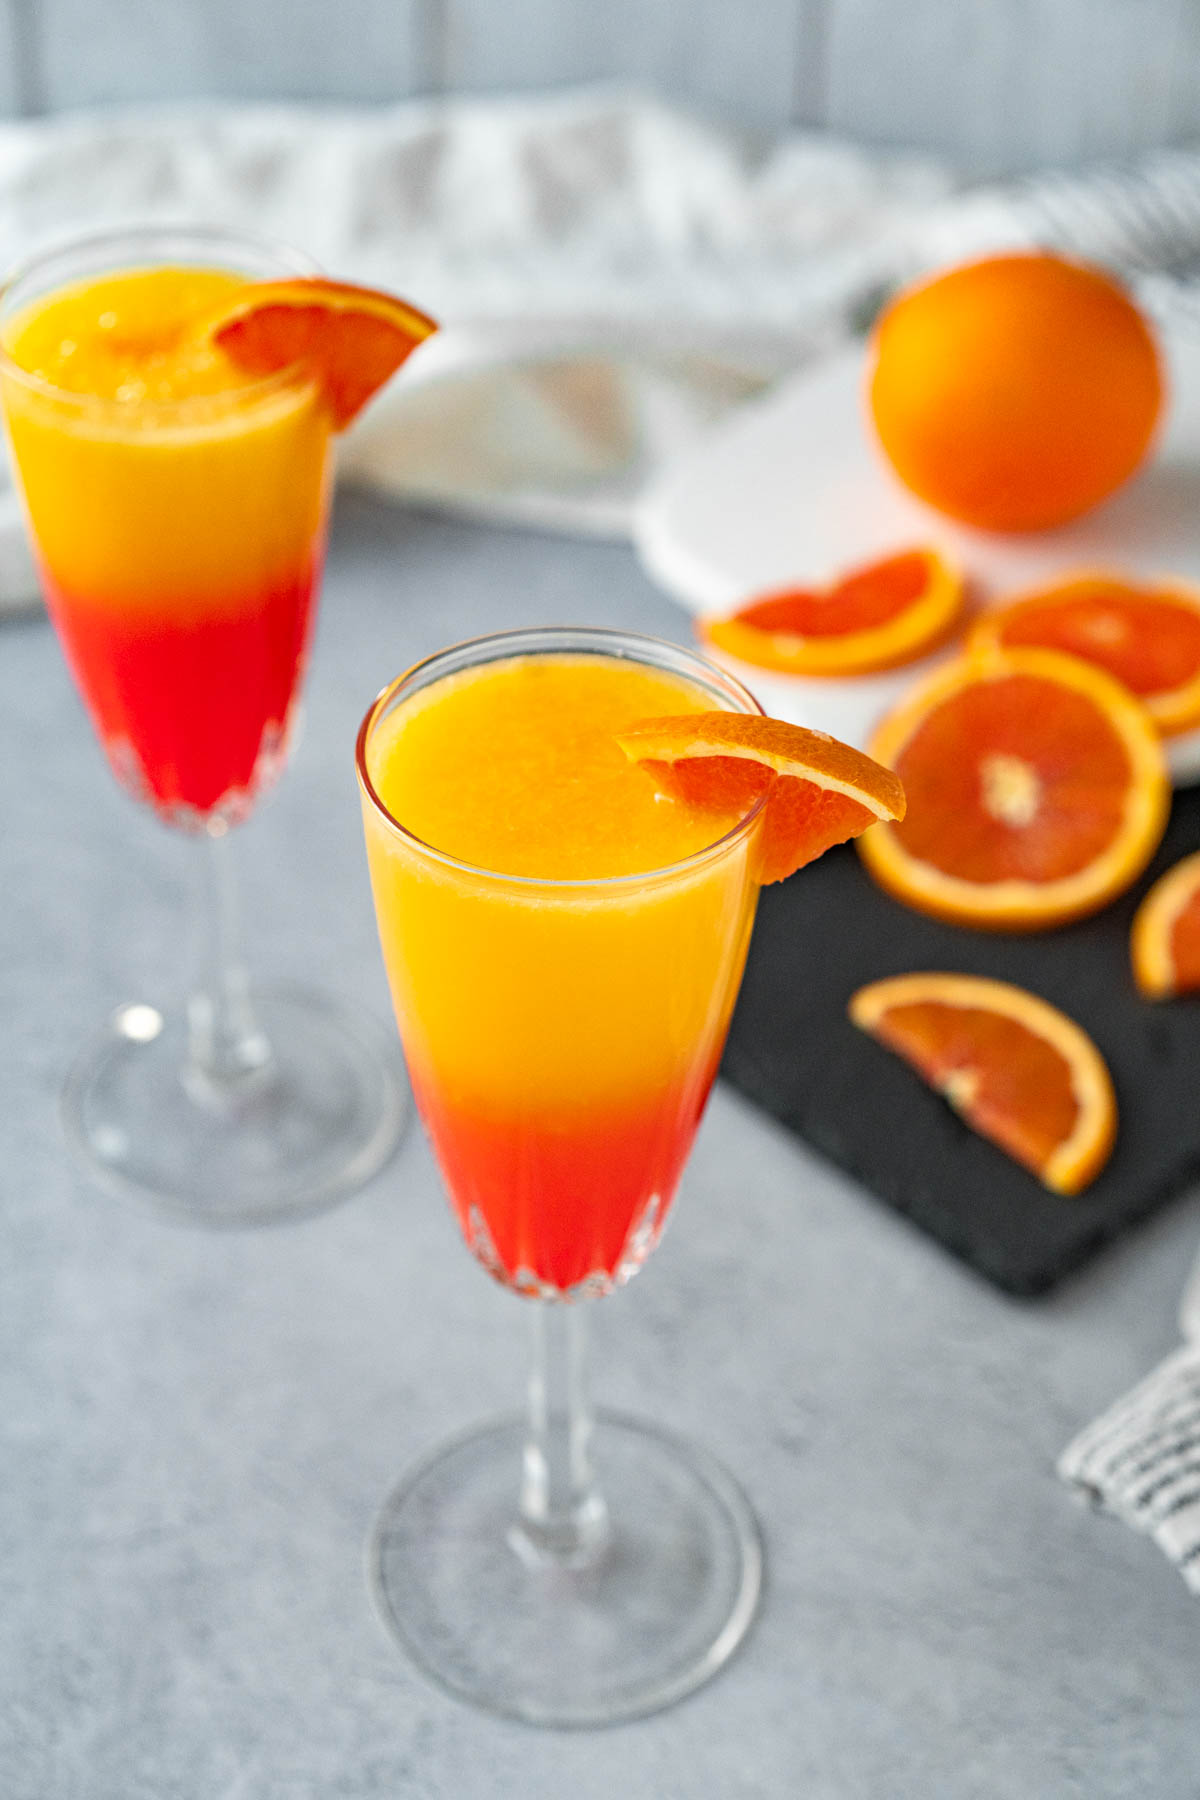 Closeup shot of two crystal champagne glasses, each garnished with an orange slice. The glasses are filled with orange juice and grenadine in a gradient fading from red-orange up to yellow-orange.